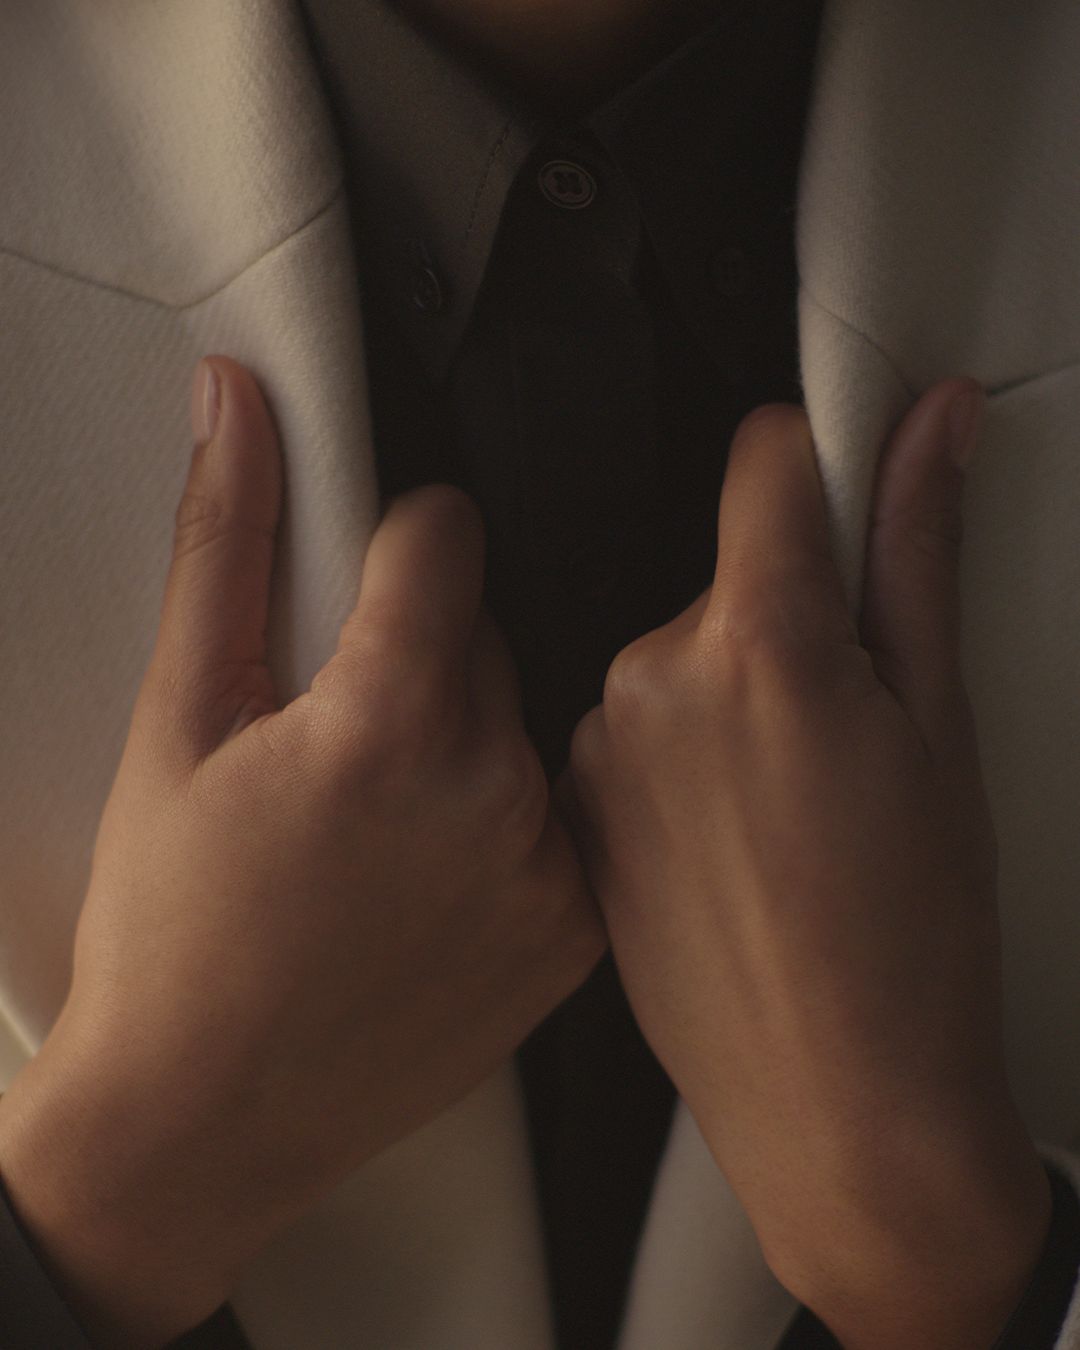 Two hands holding white coat lapel blurred movements on hands dark light with shadow across knuckles. 